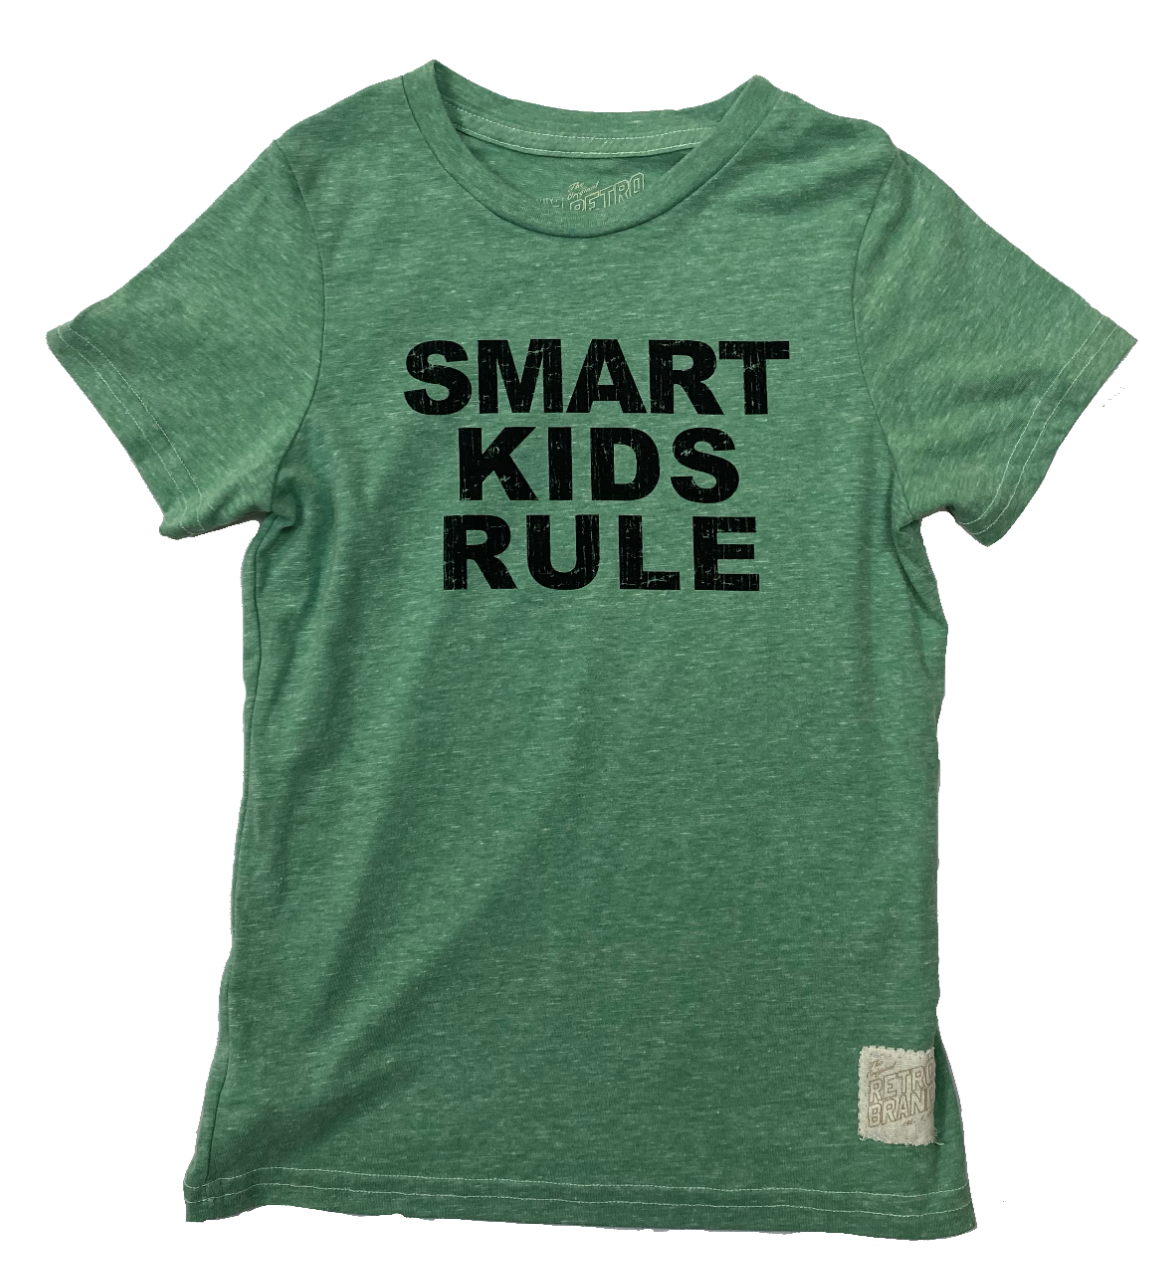 Smart Kids Rule Tri-Blend Tee (Toddler/Youth)